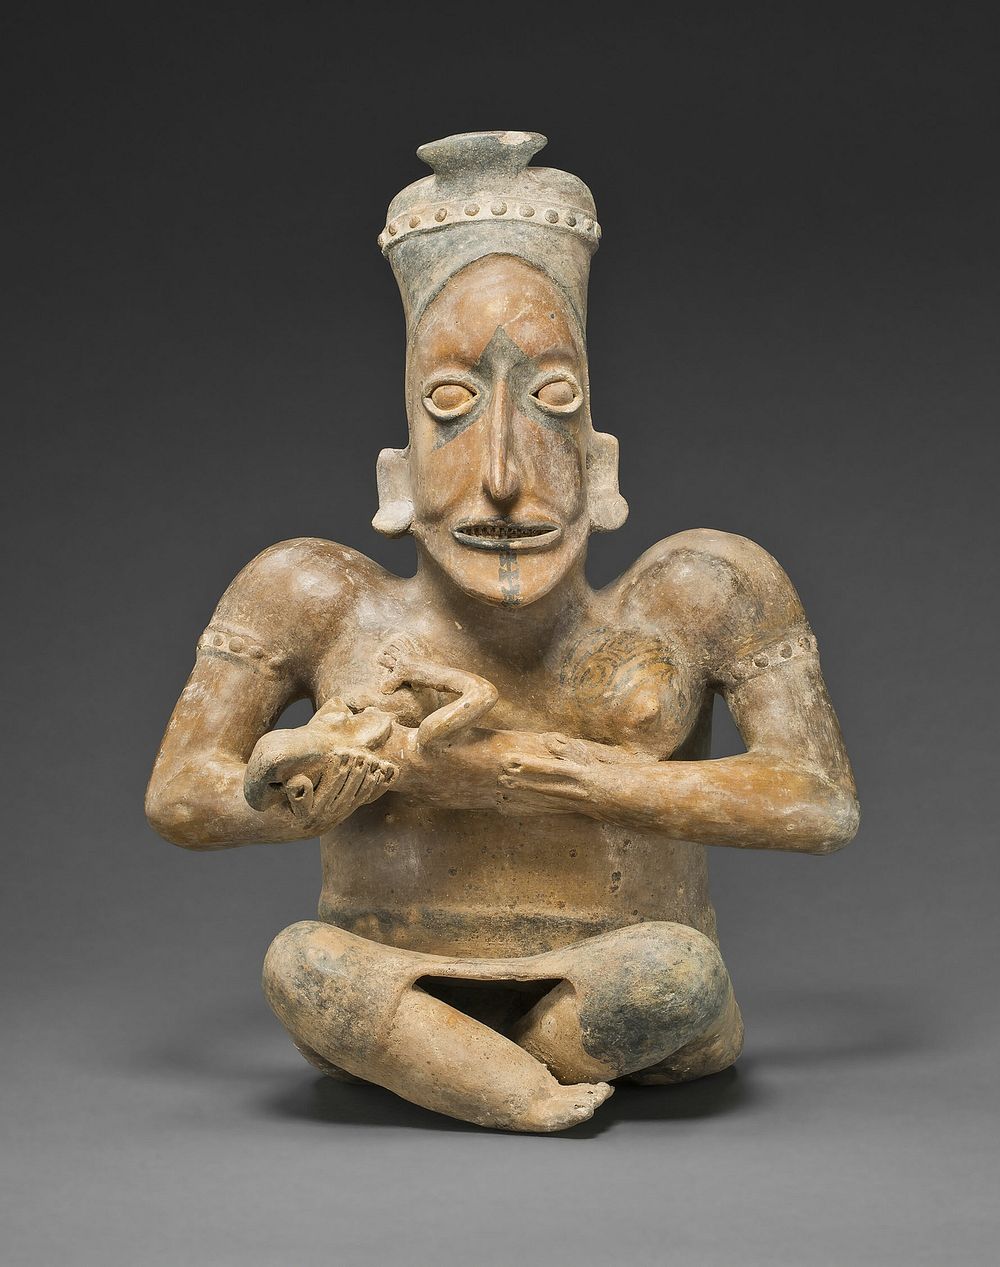 Seated Maternity Figure by Jalisco